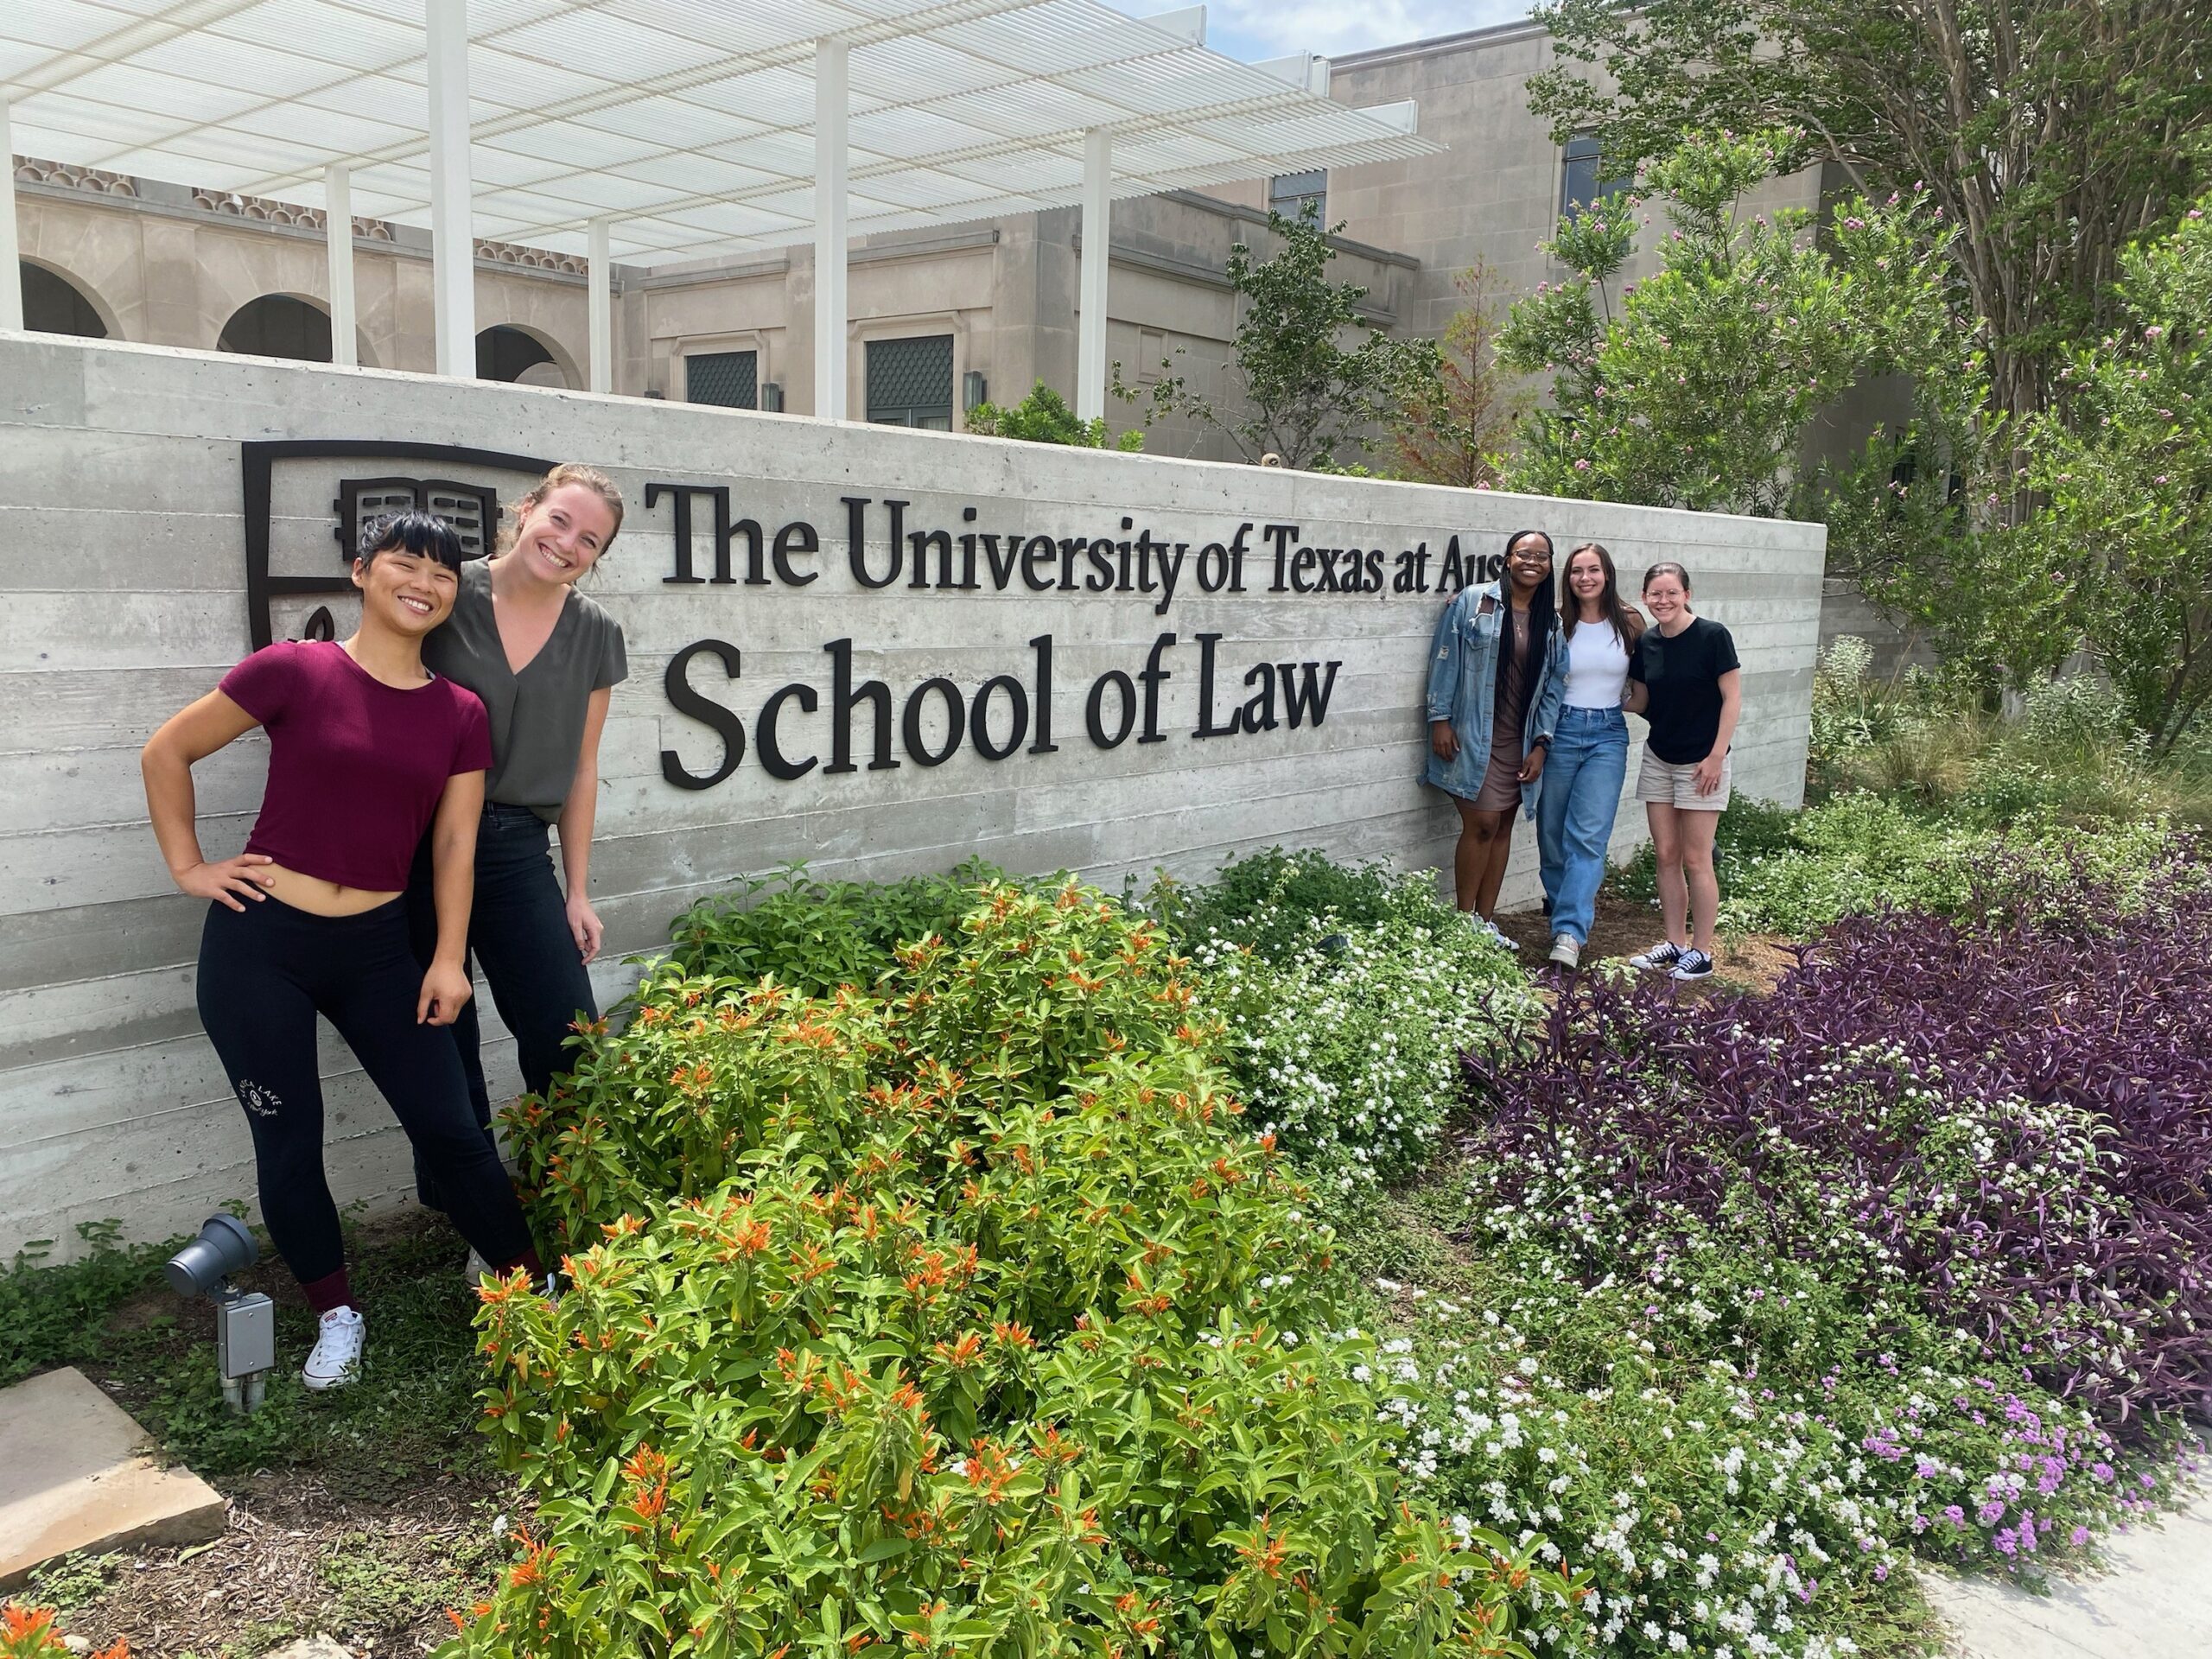 Five women stand in front of a low brick wall with The University of Texas School of Law work mark on its facade